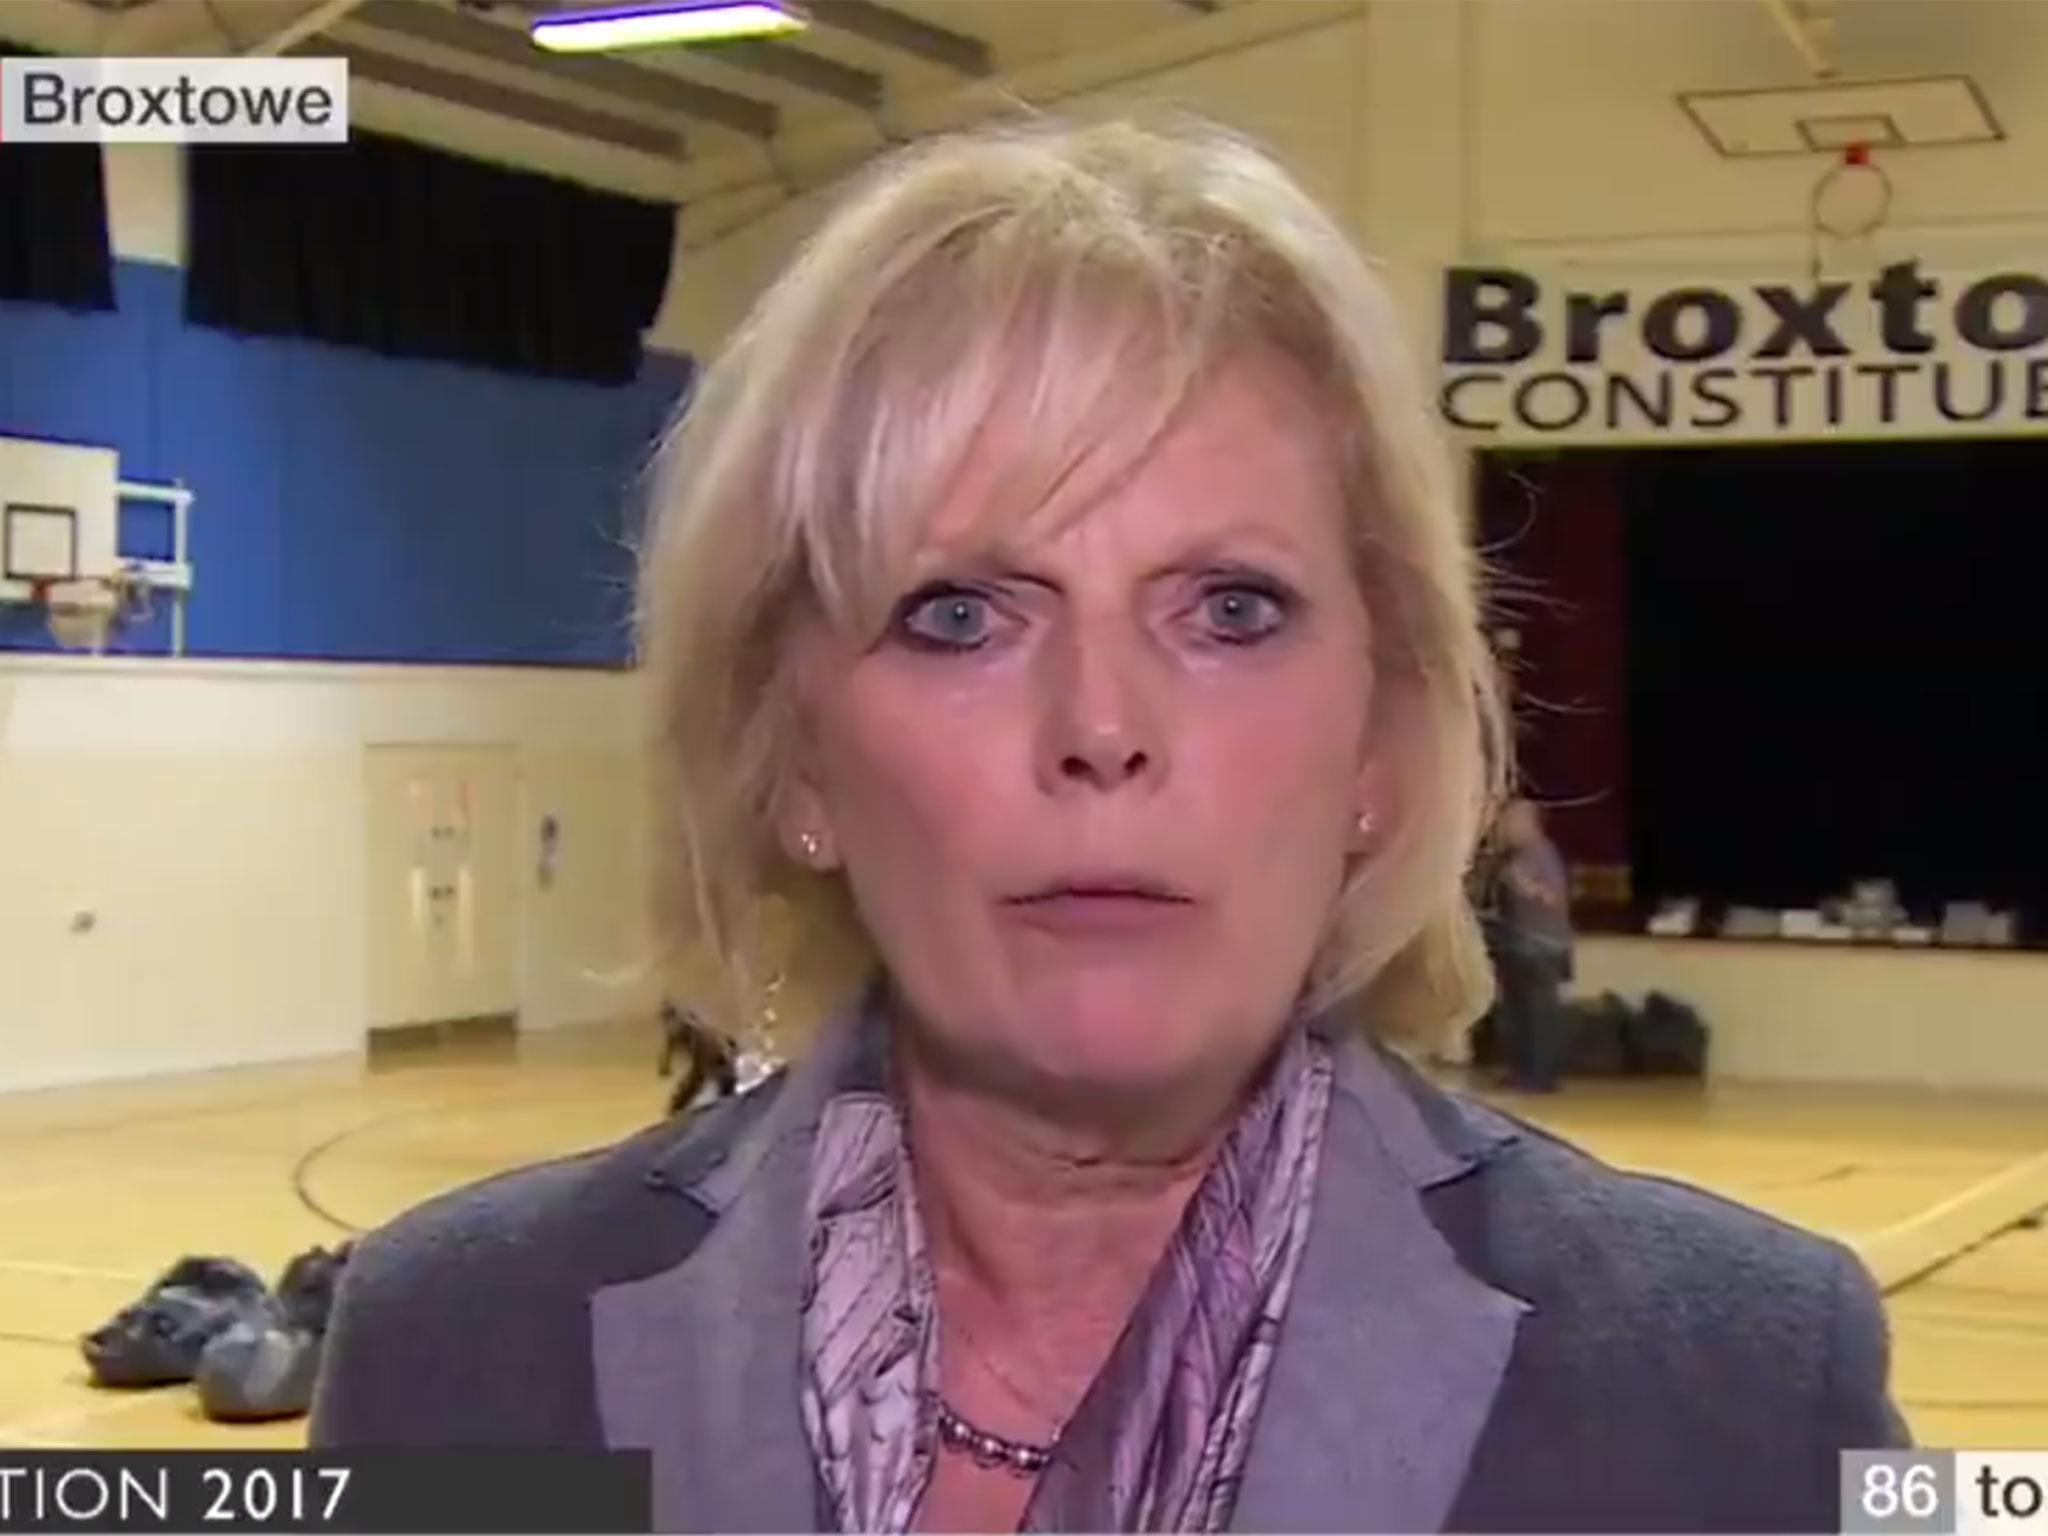 Anna Soubry Senior Tory Mp Savages Theresa May And Dreadful Campaign On Live Tv The Independent